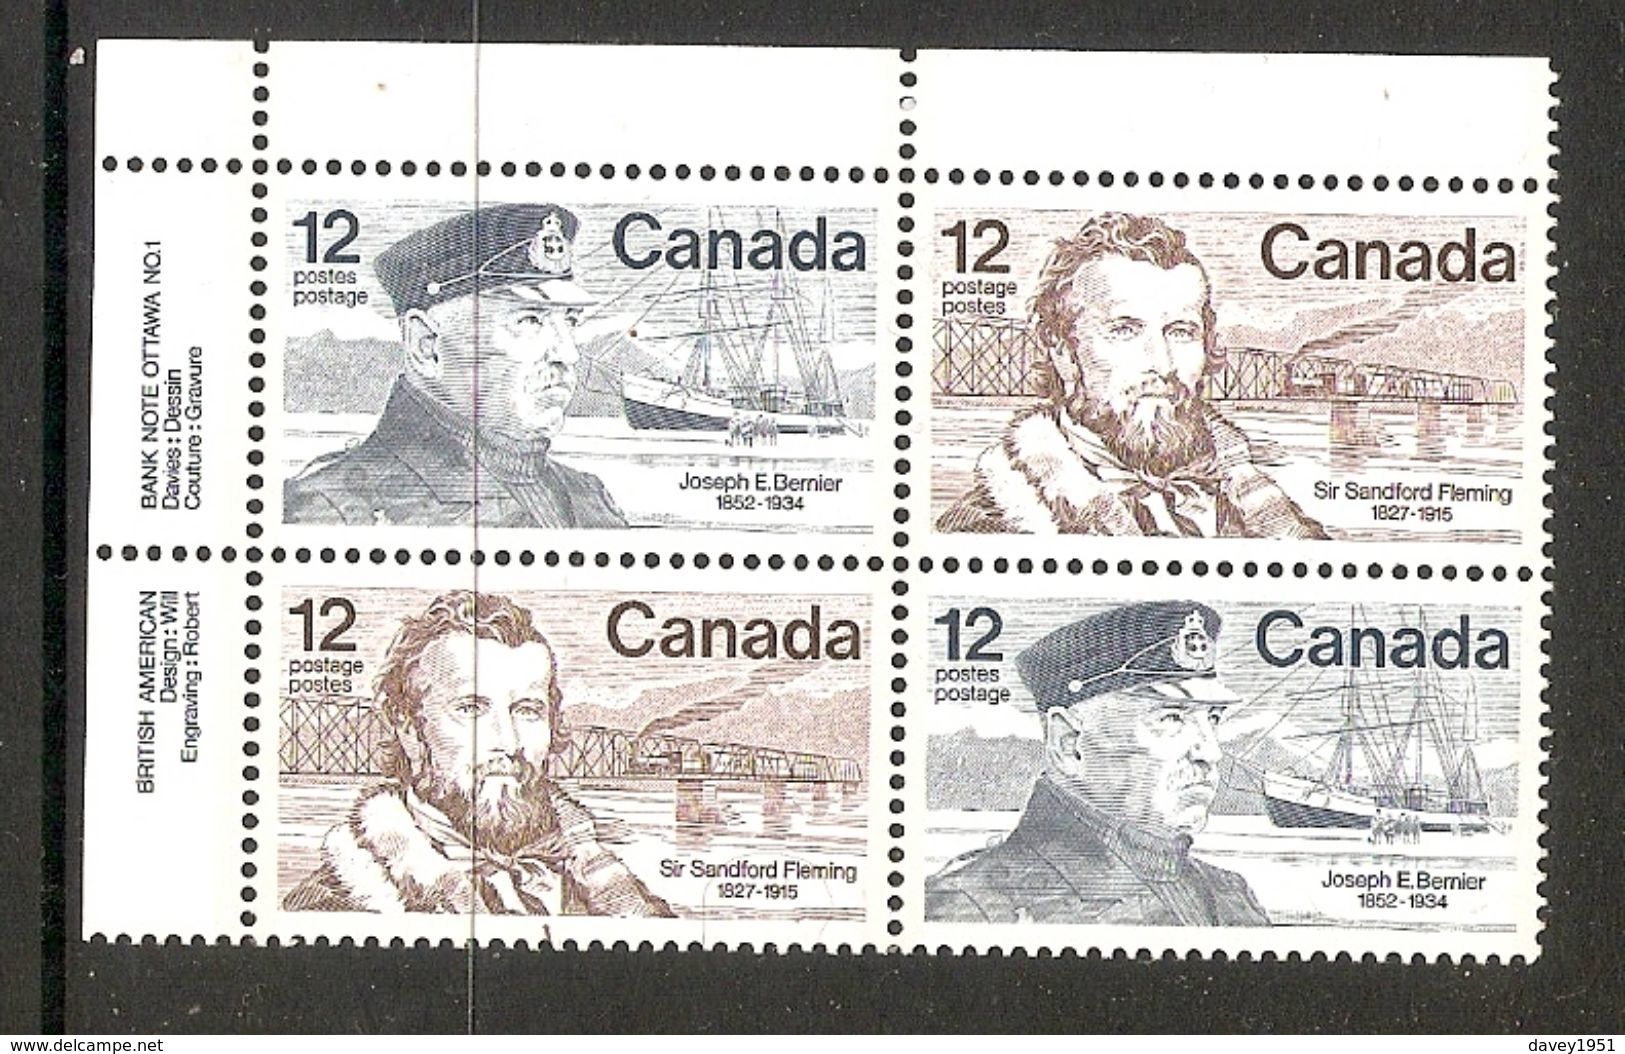 006366 Canada 1977 Canadians 12c Plate Block UL MNH - Plate Number & Inscriptions